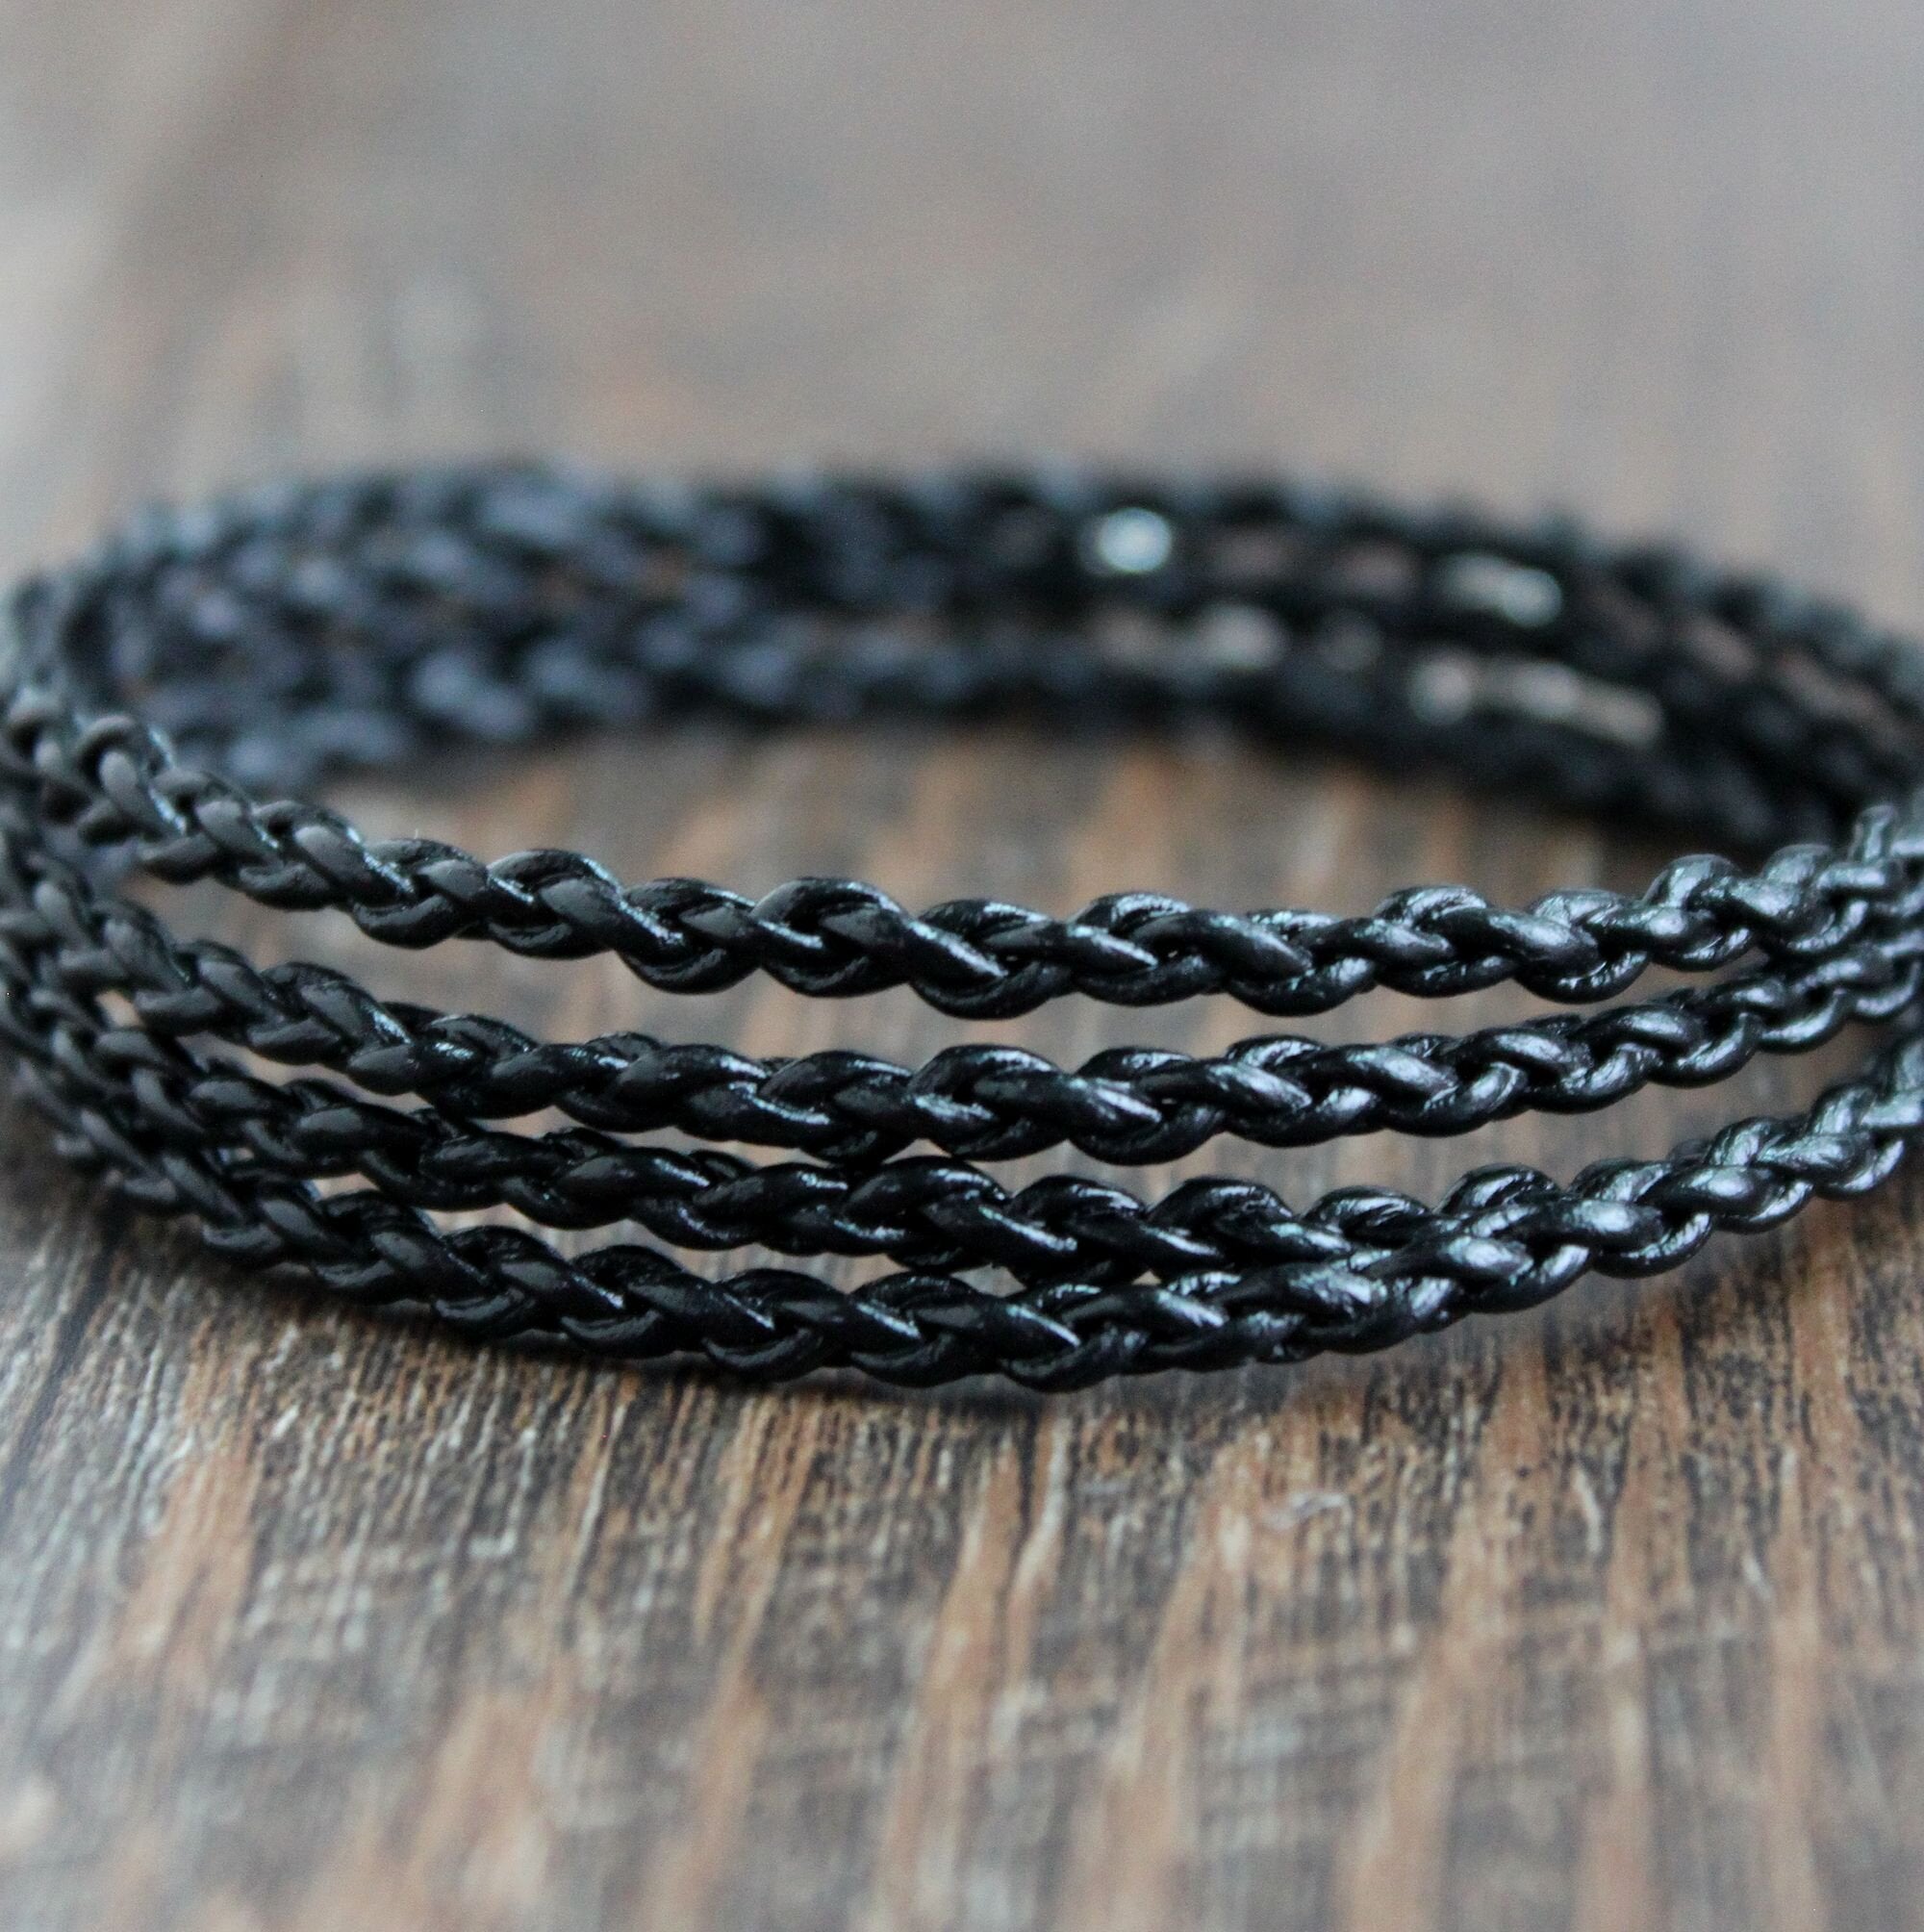 Buy CALANDIS® Woven Braided PU Leather Men Bracelet Bangle Wristband Black  Silver Metal at Amazon.in